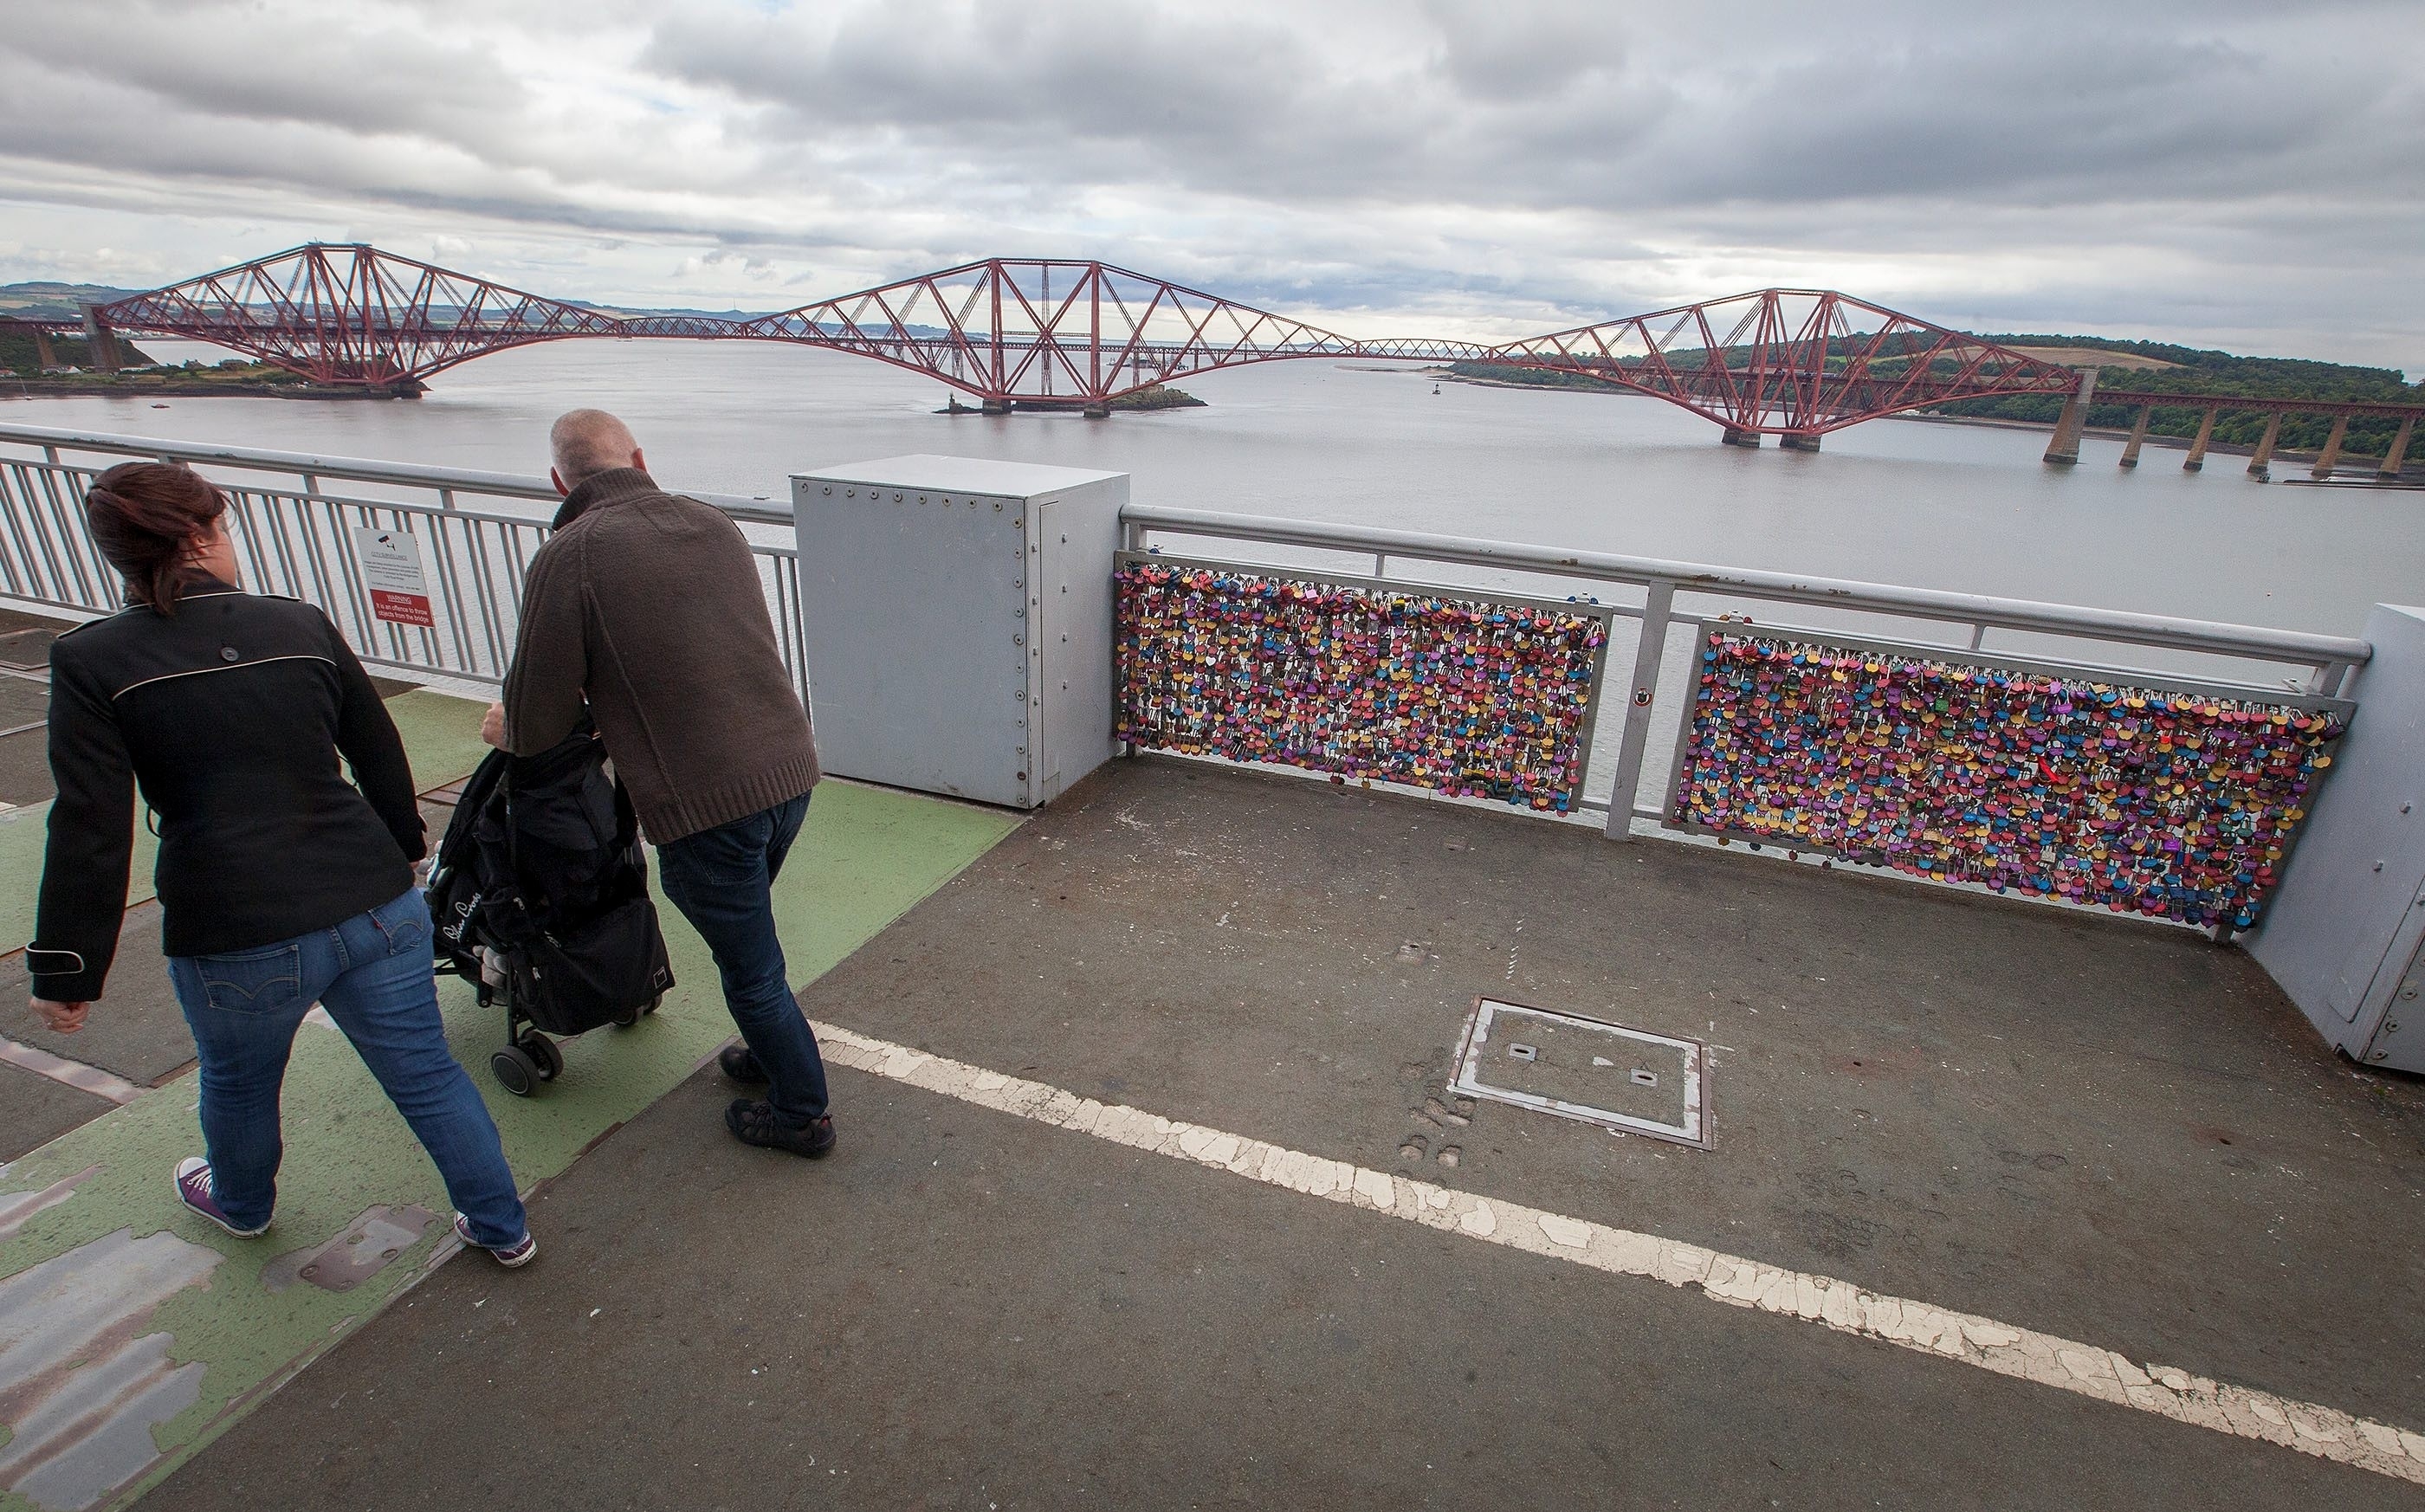 Etched with an unknown duos name, the padlock prompted the Forth Road Bridge team to establish a love lock initiative, allowing couples to place an engraved padlock on the bridge while raising funds for charity. 